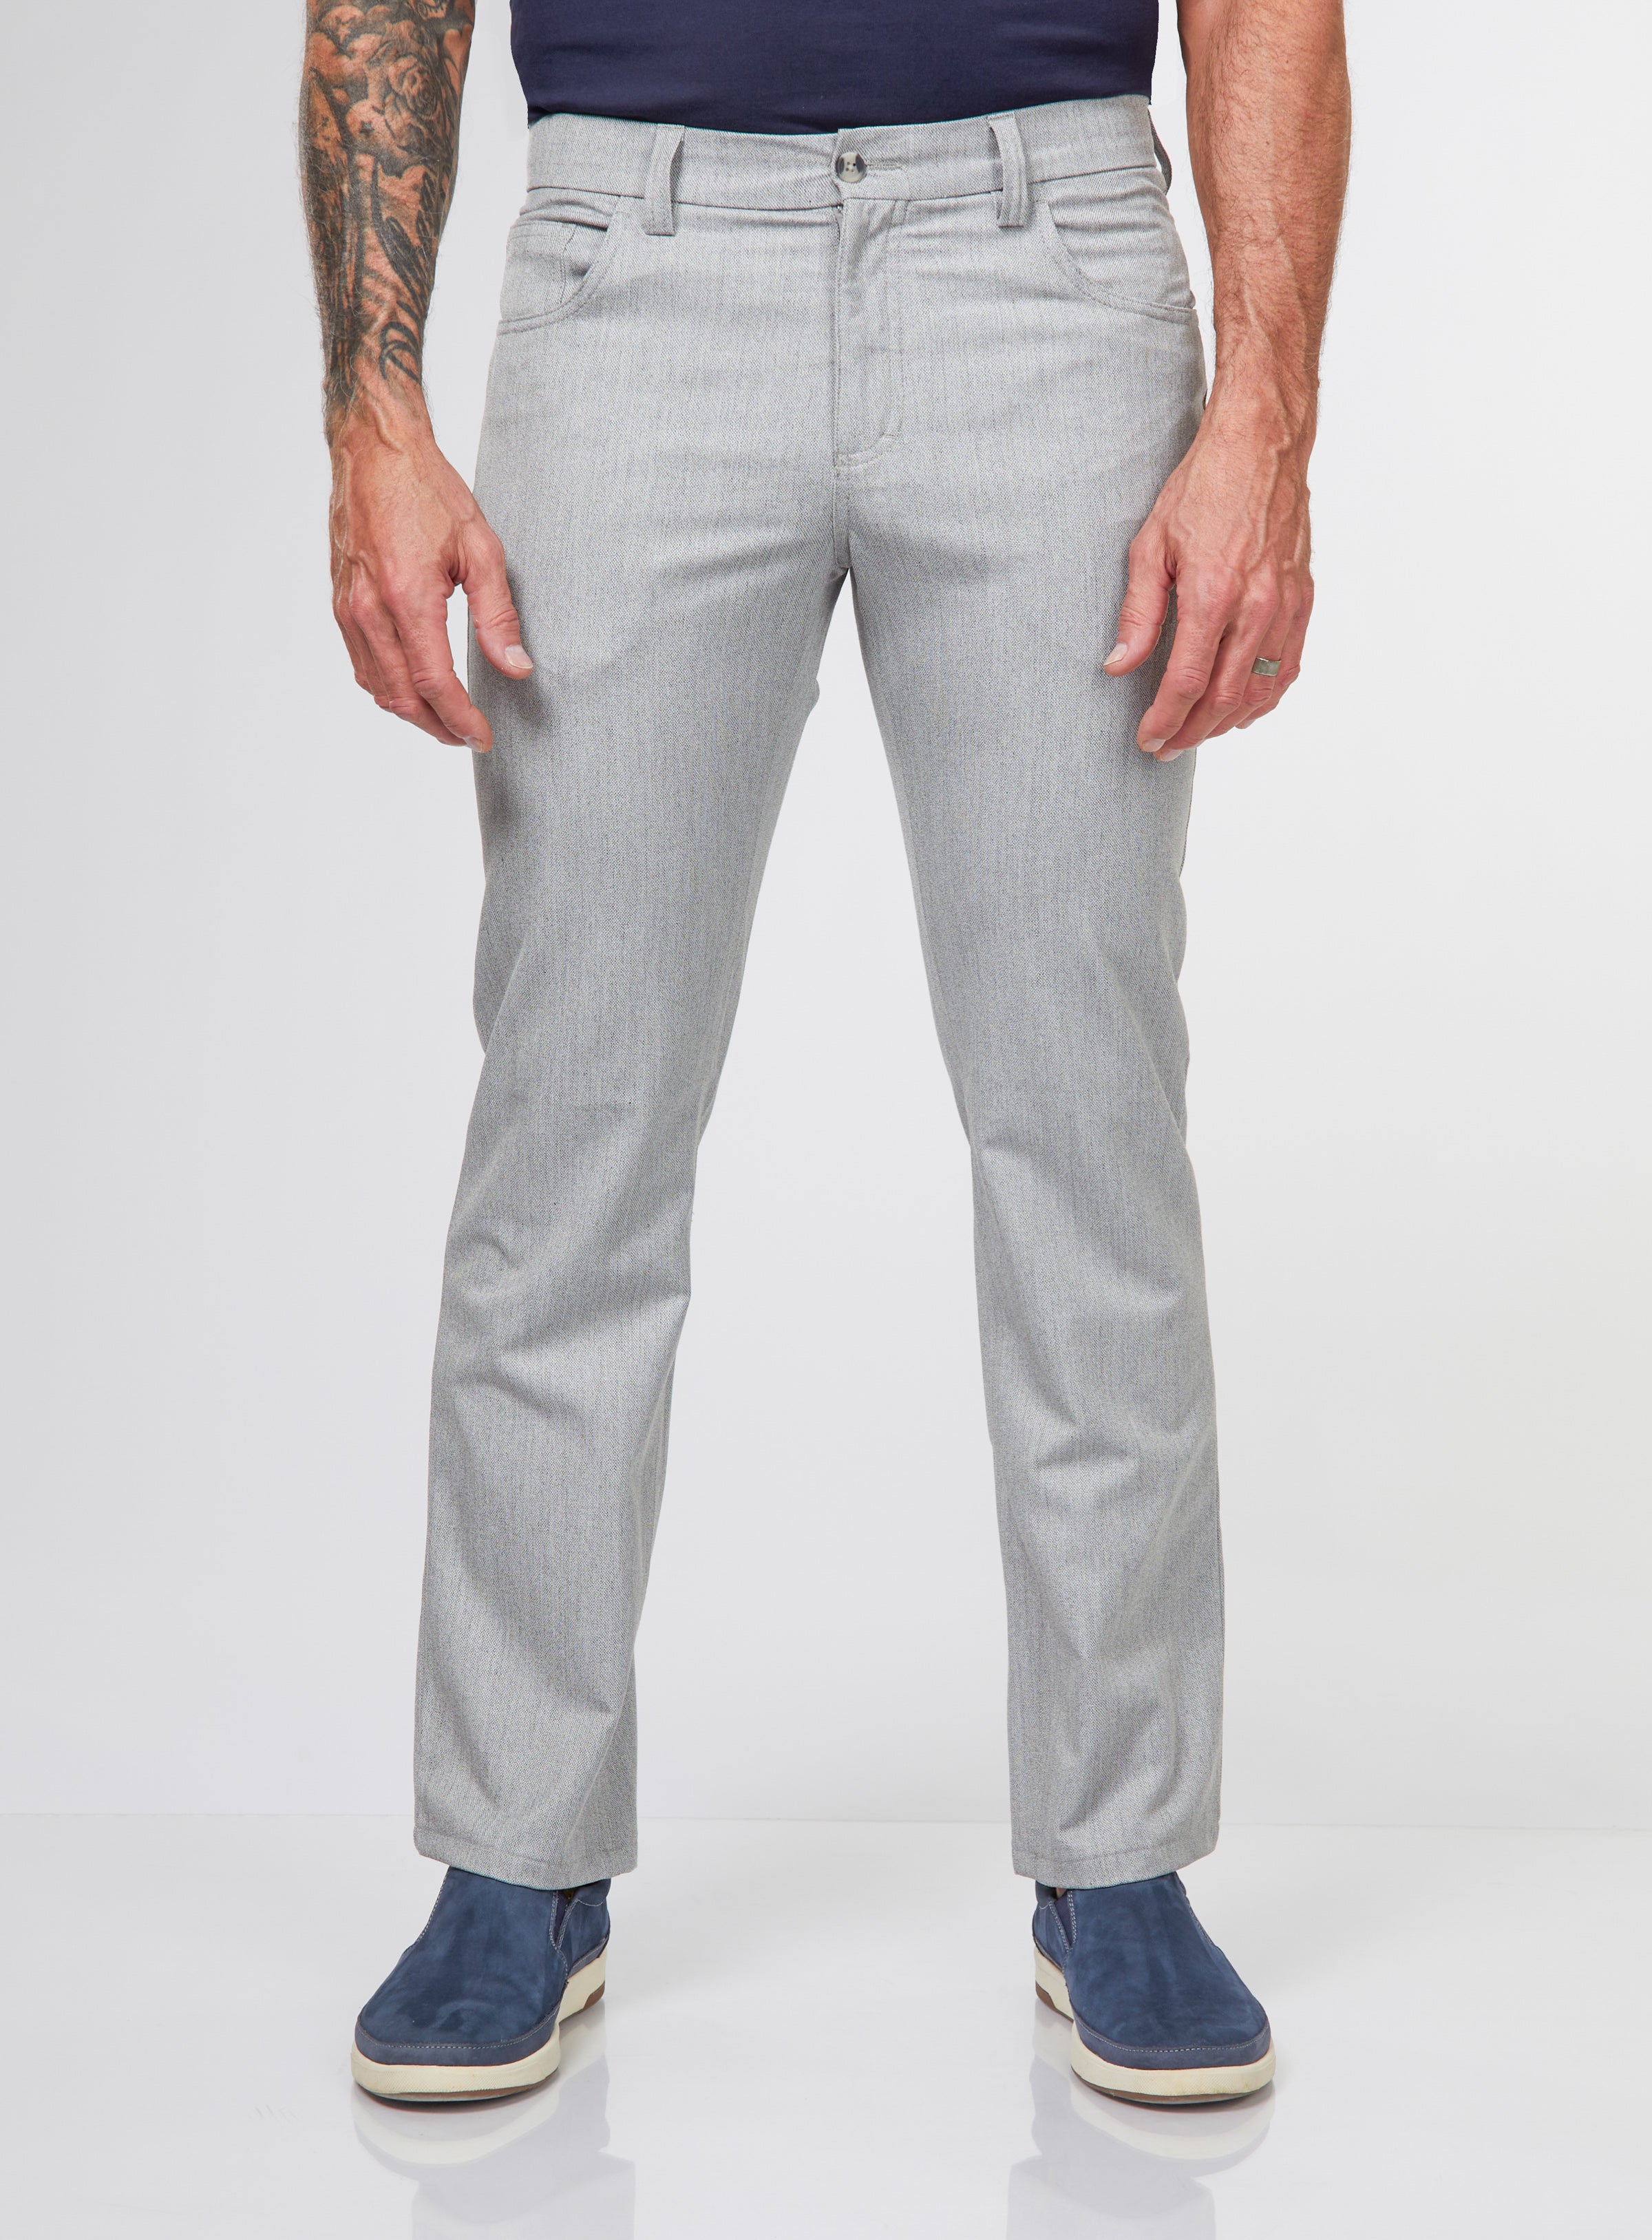 PANTALON DRILL AZUL SLIM FIT - Buy in CHIETY